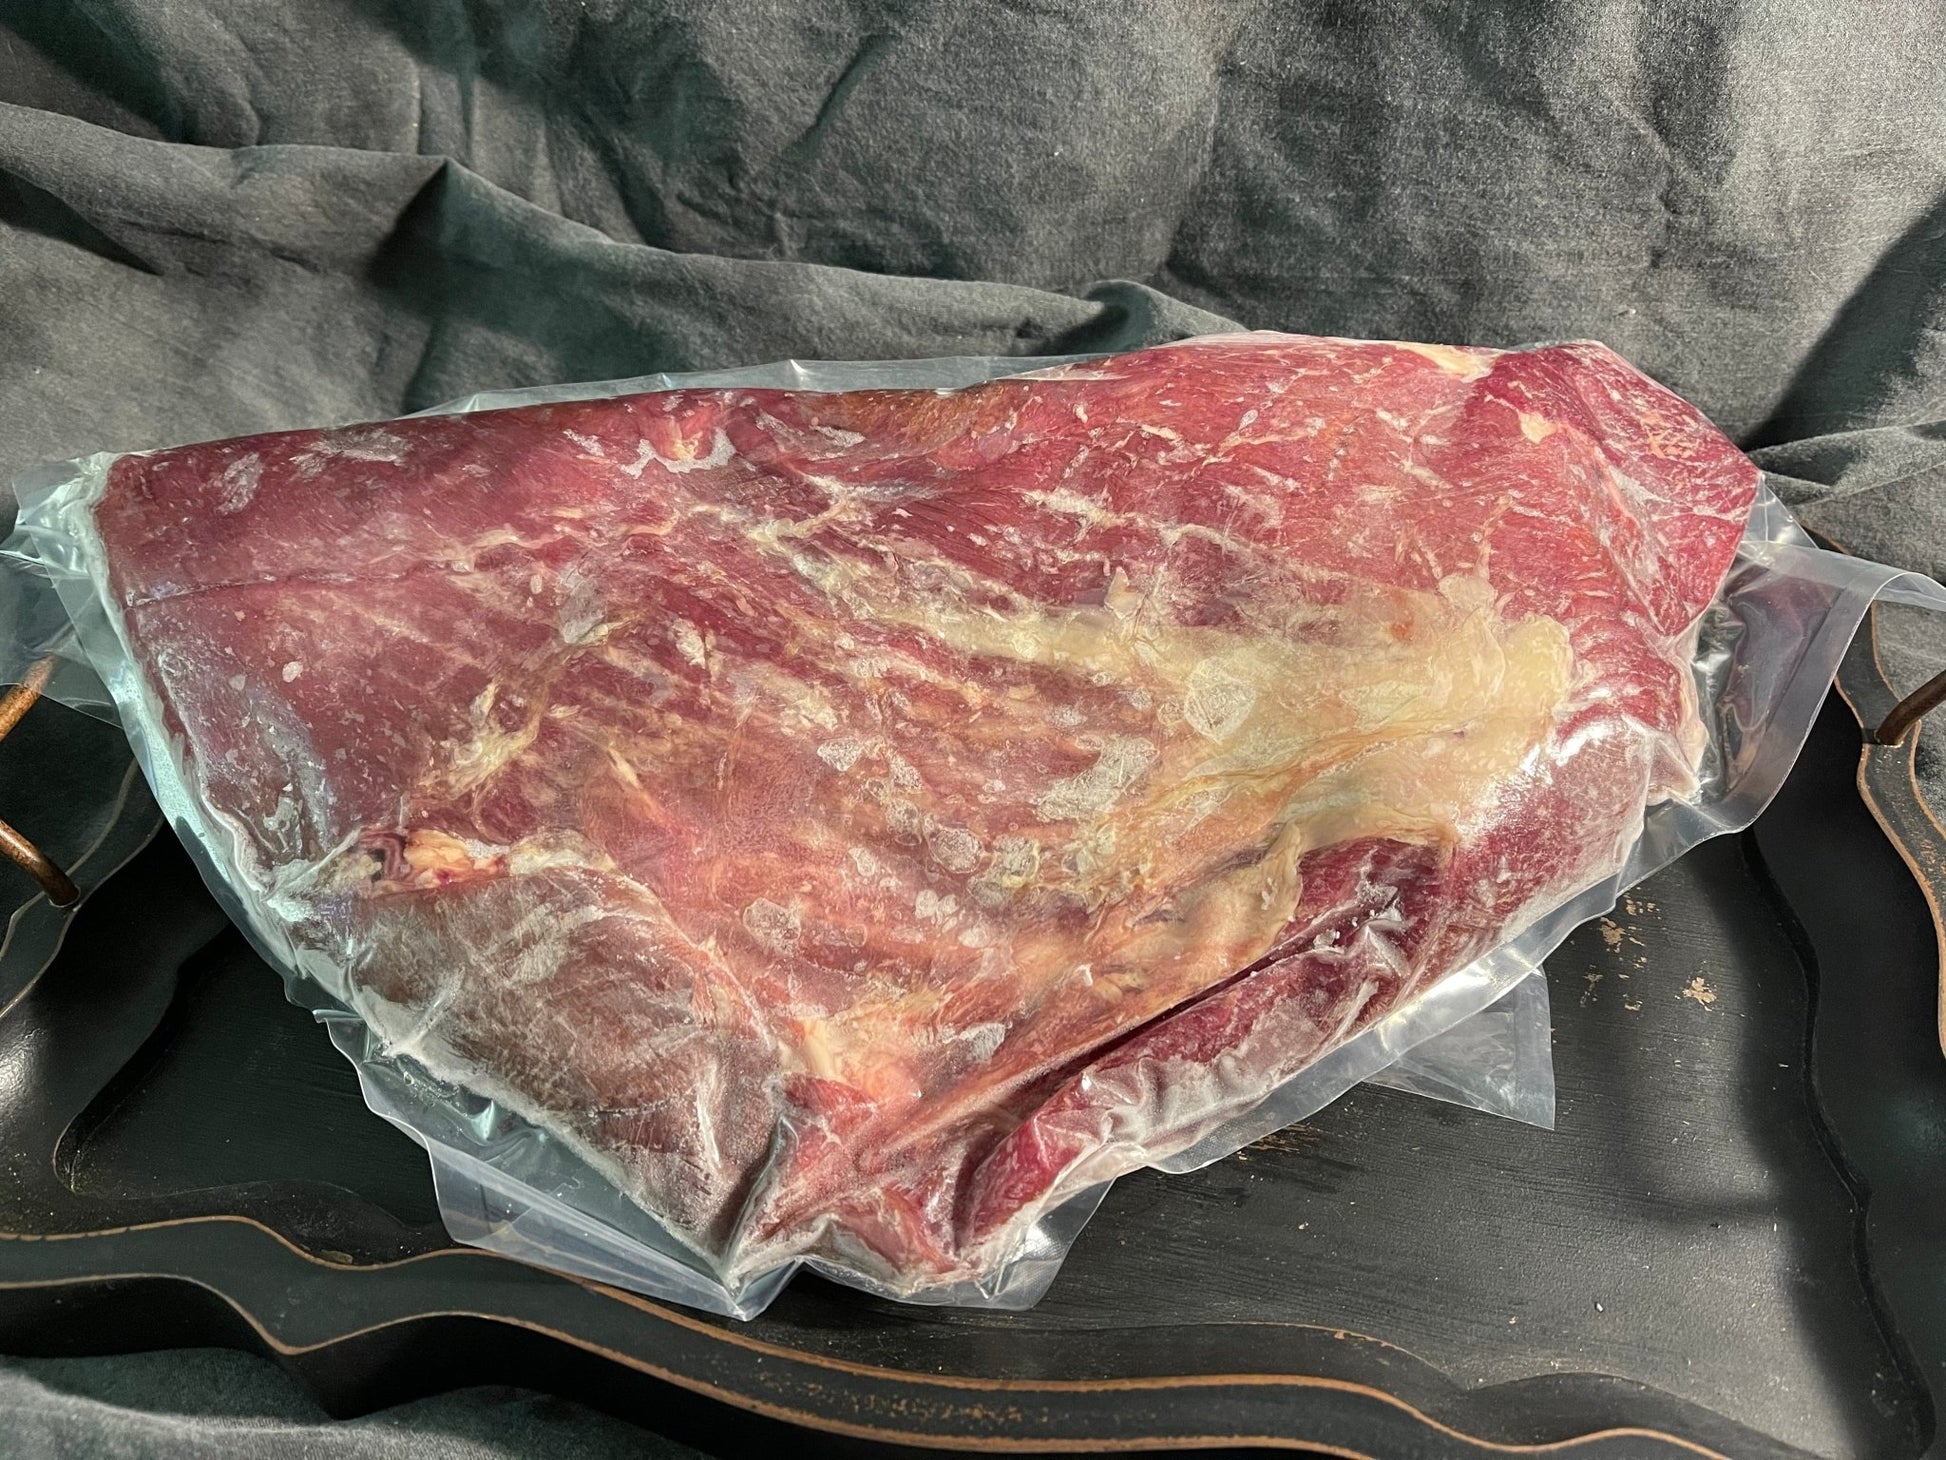 100% All-Natural Grass-Fed "Misfit" Beef Half Brisket - The Hufeisen-Ranch (WYO Wagyu)